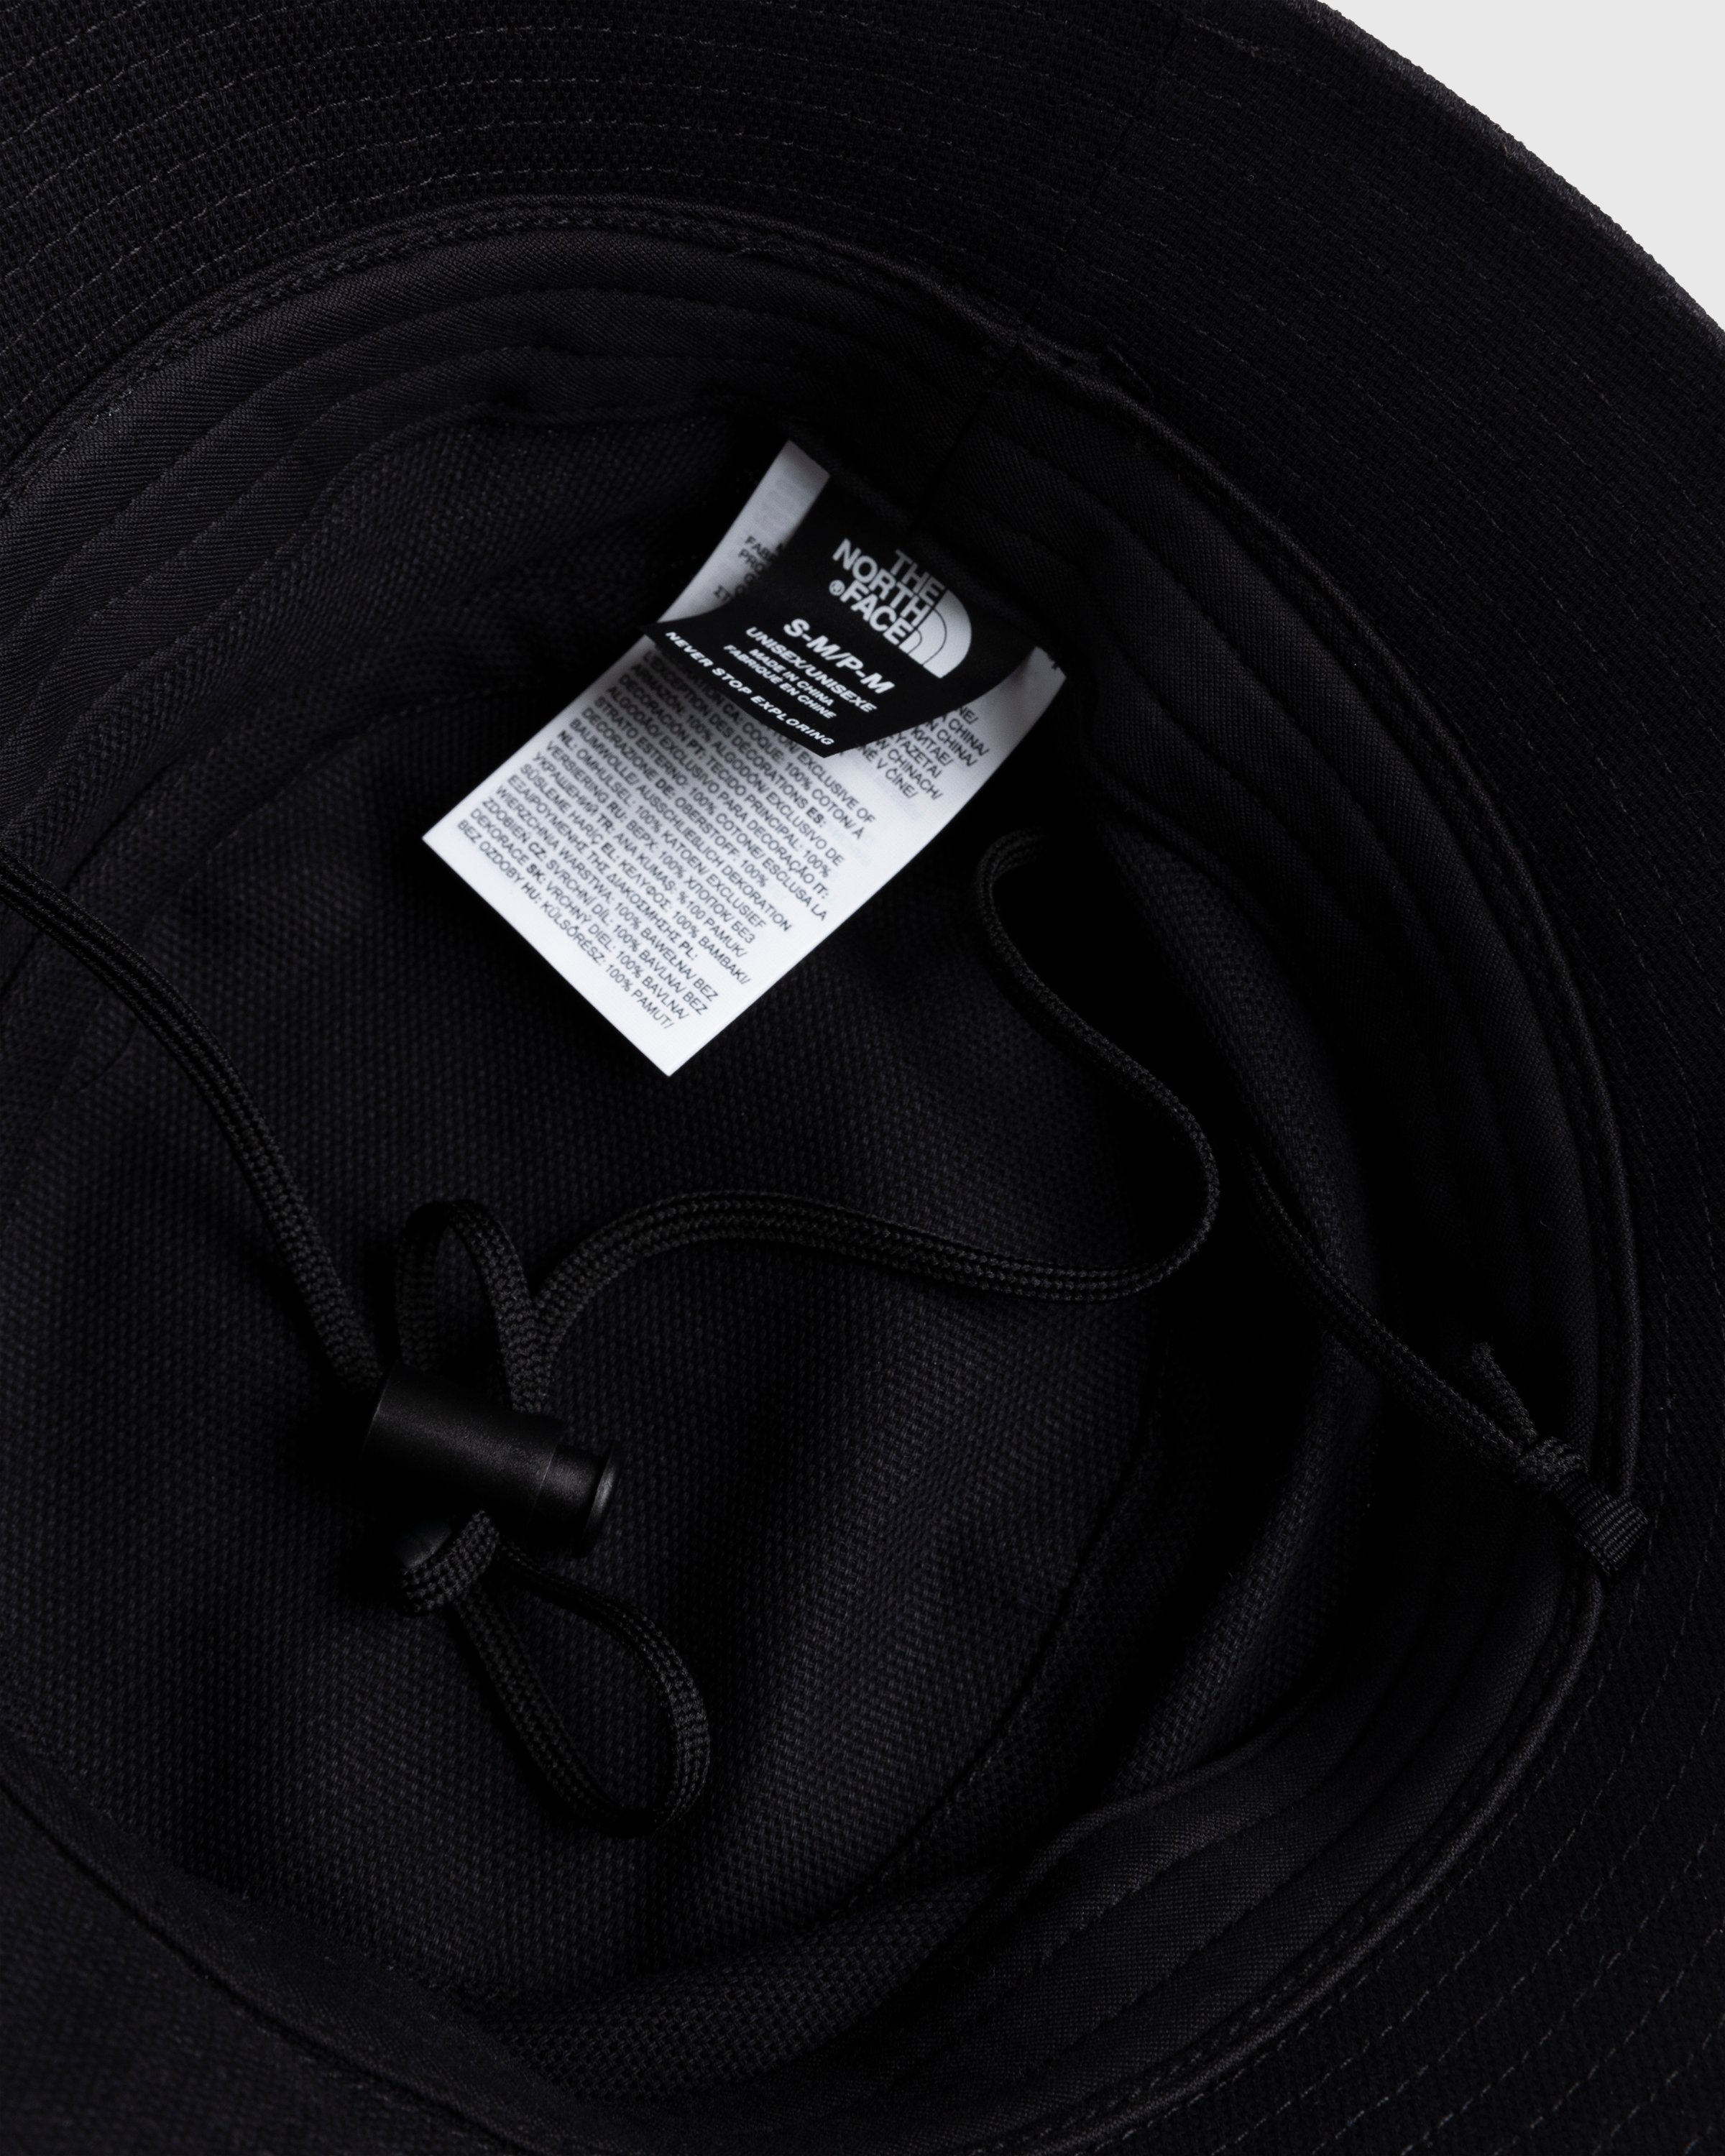 The North Face - Mountain Bucket Hat TNF Black - Accessories - Black - Image 4